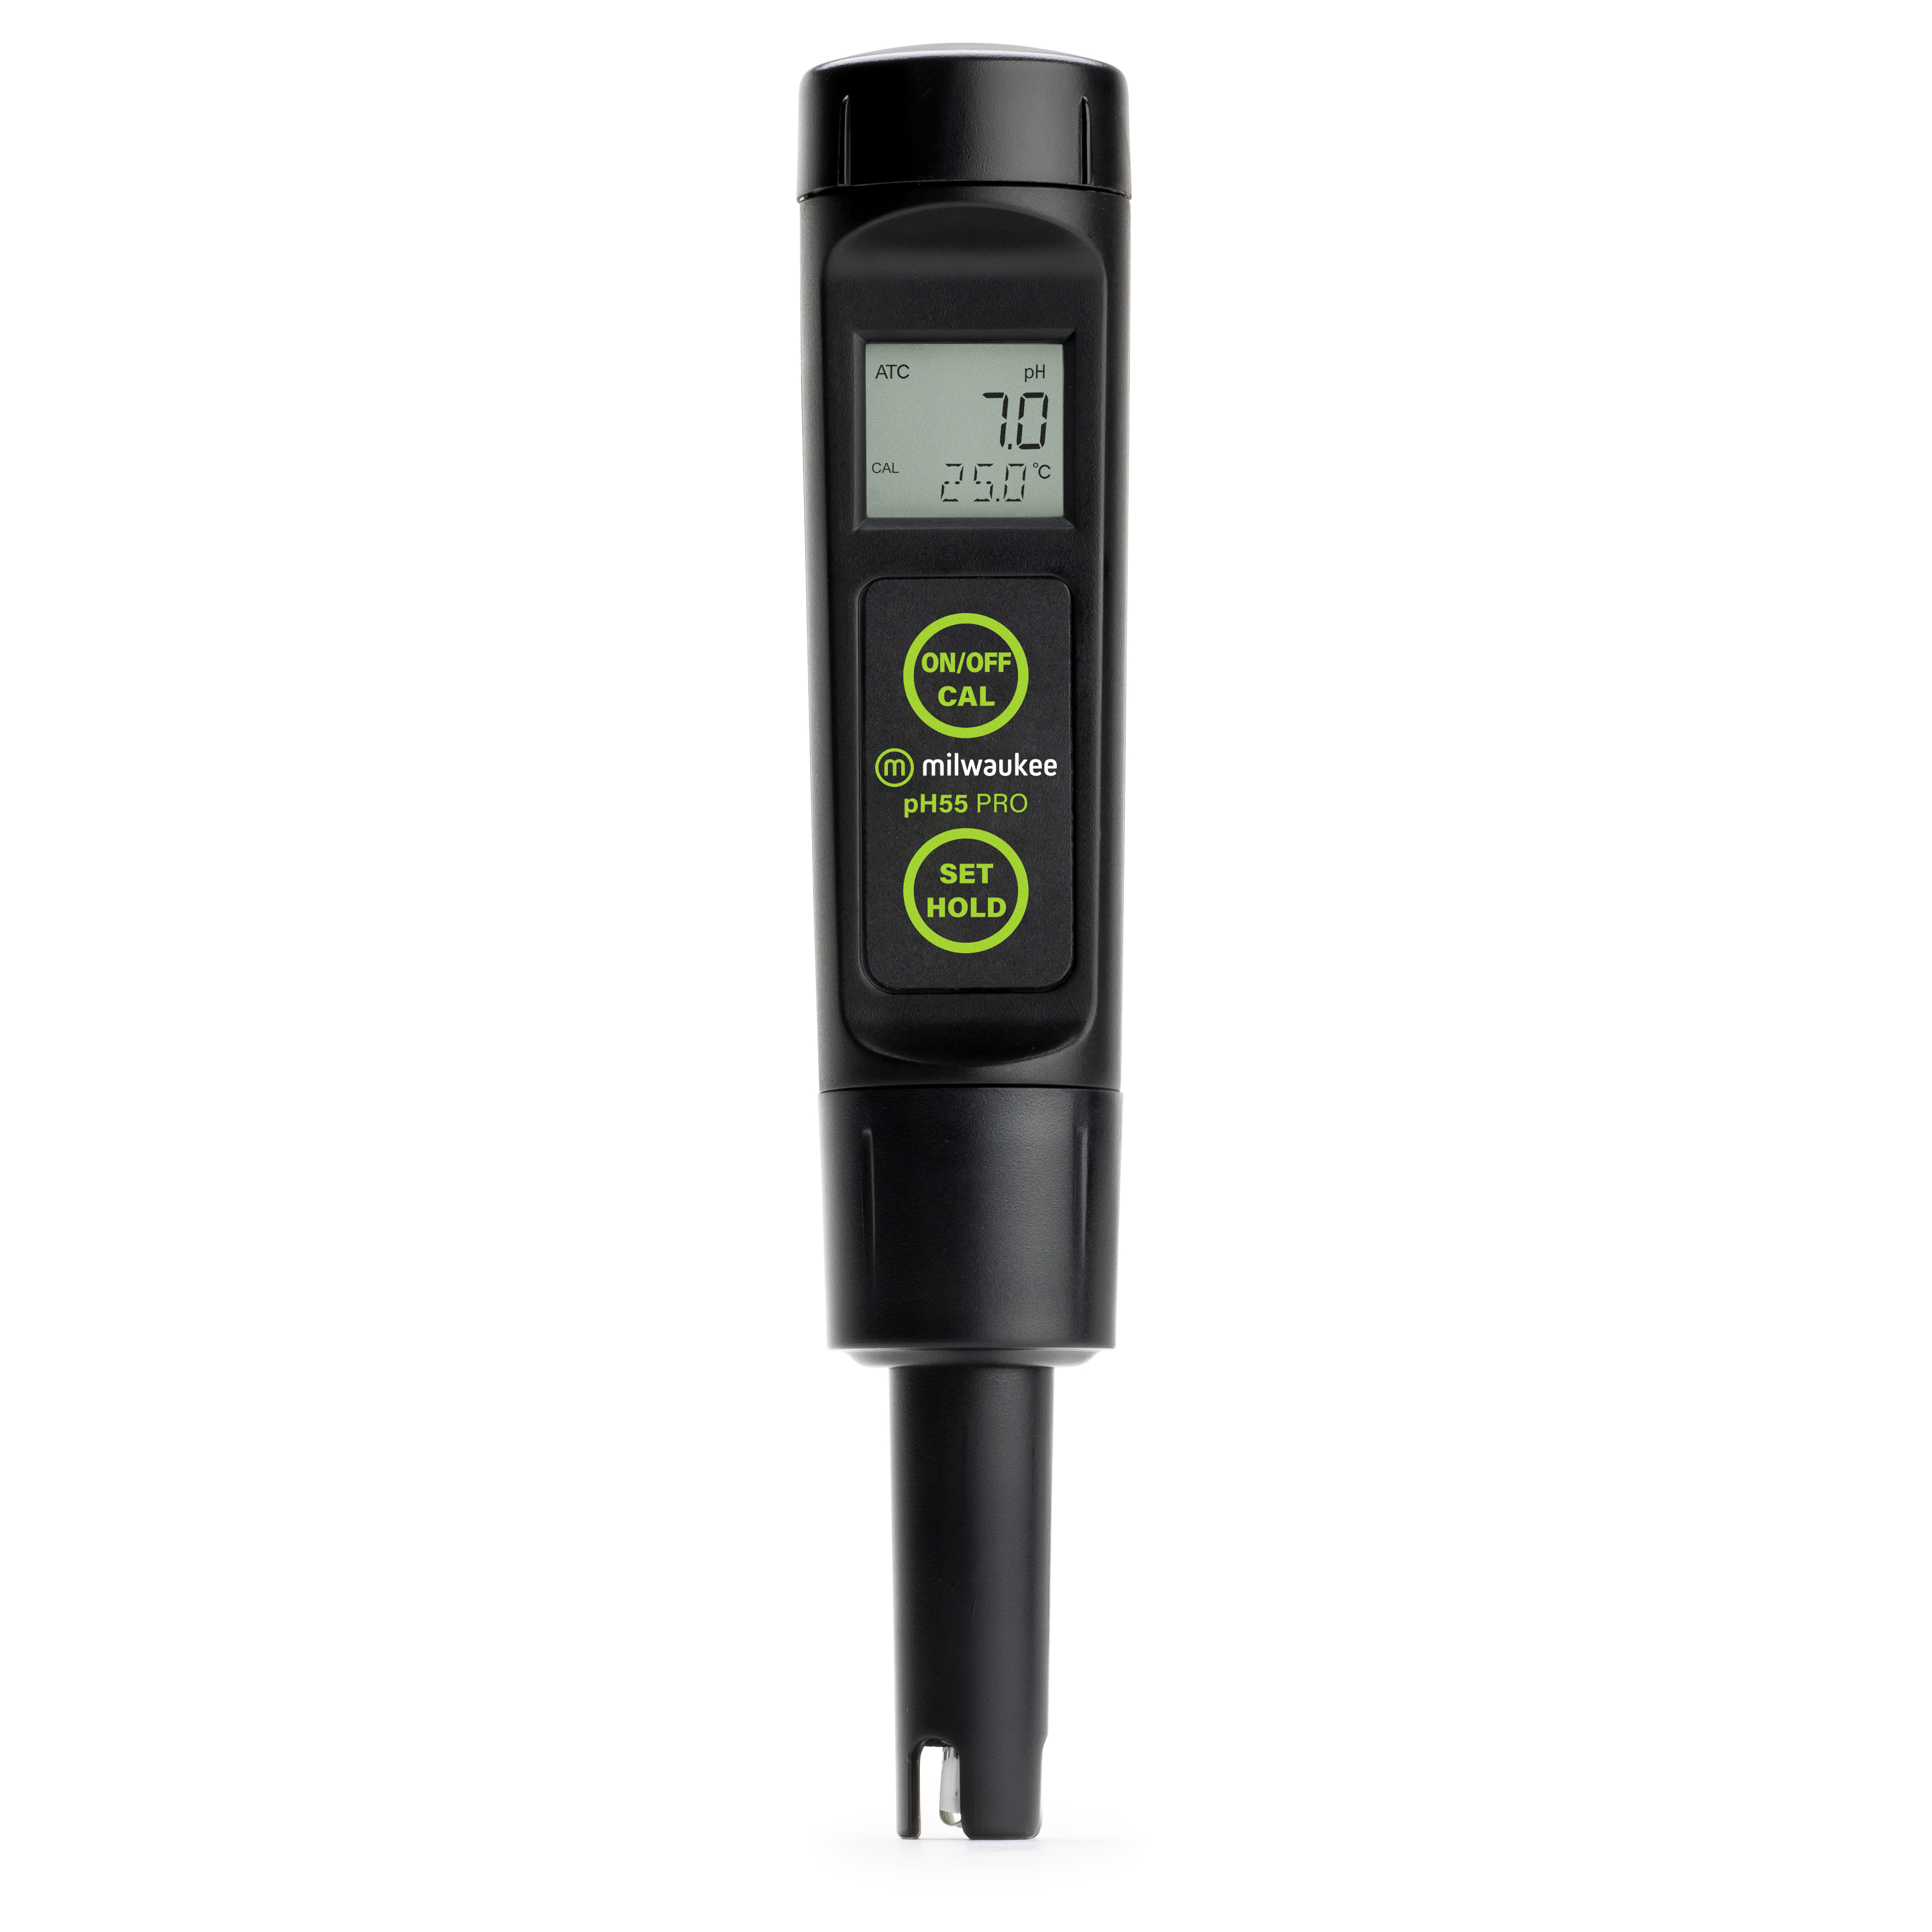 Milwaukee PH55 PRO Waterproof pH & Temperature Tester with ATC & a Replaceable Probe